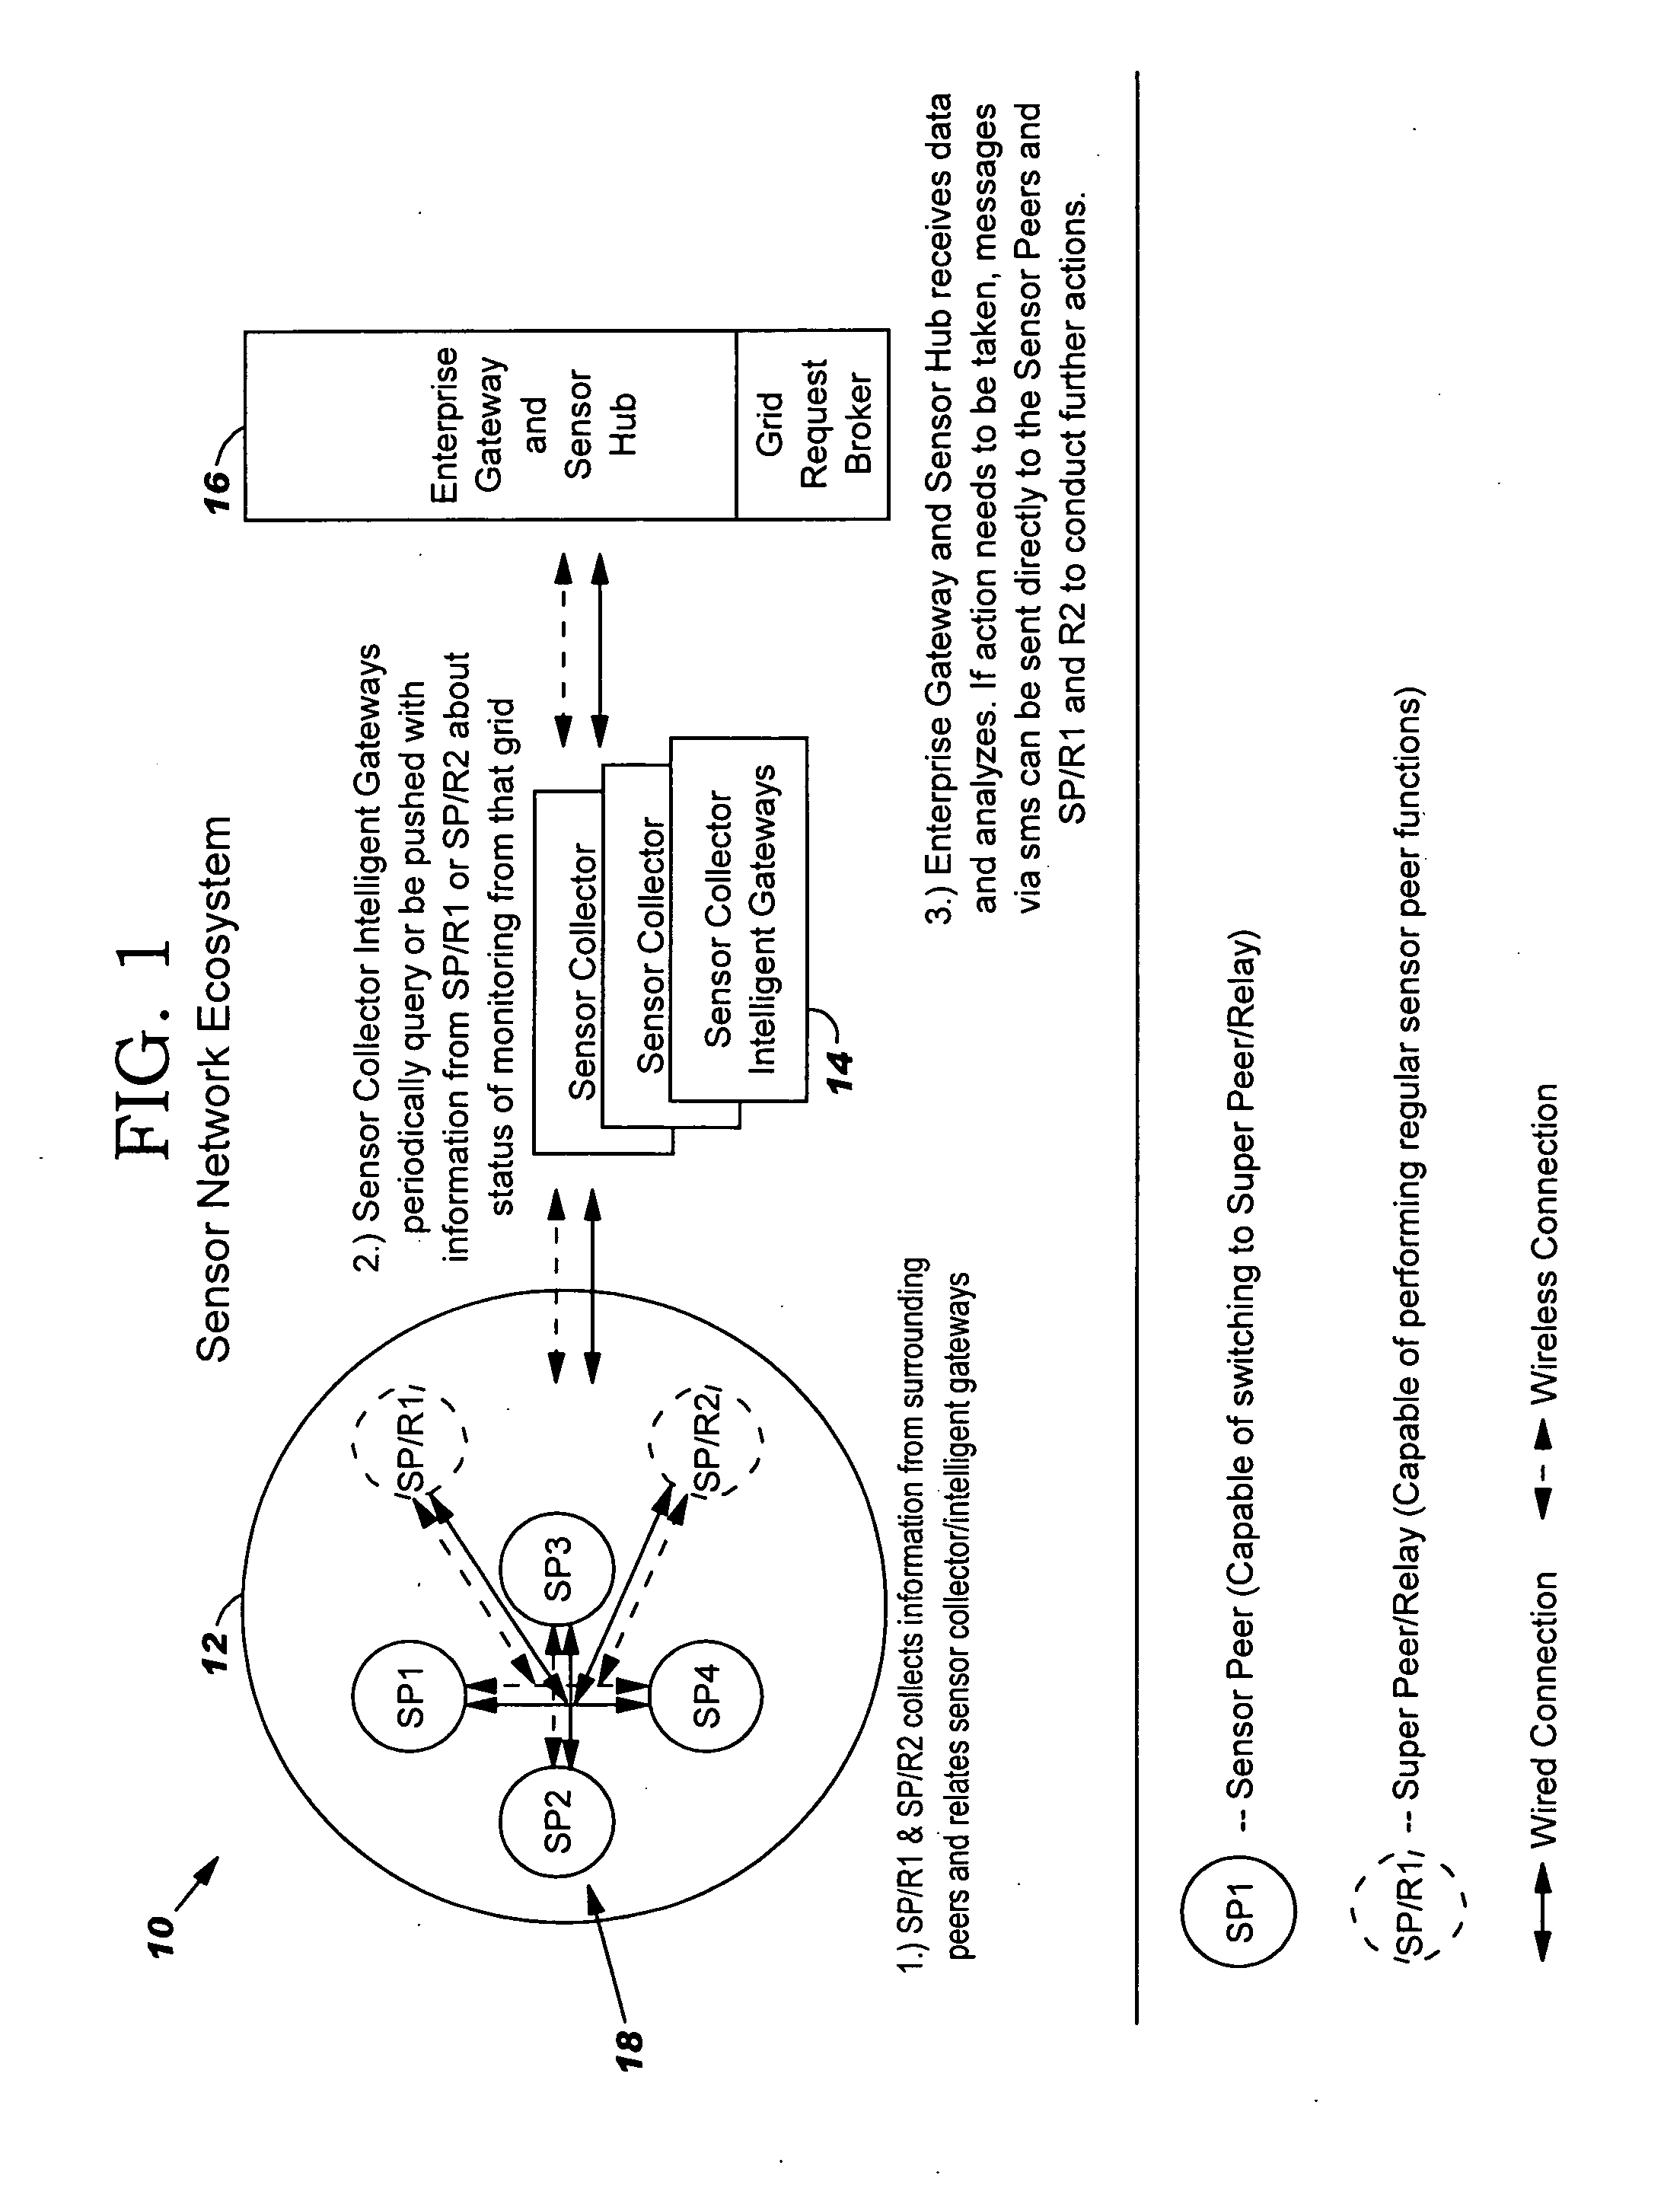 Method, system and program product for deploying and allocating an autonomic sensor network ecosystem